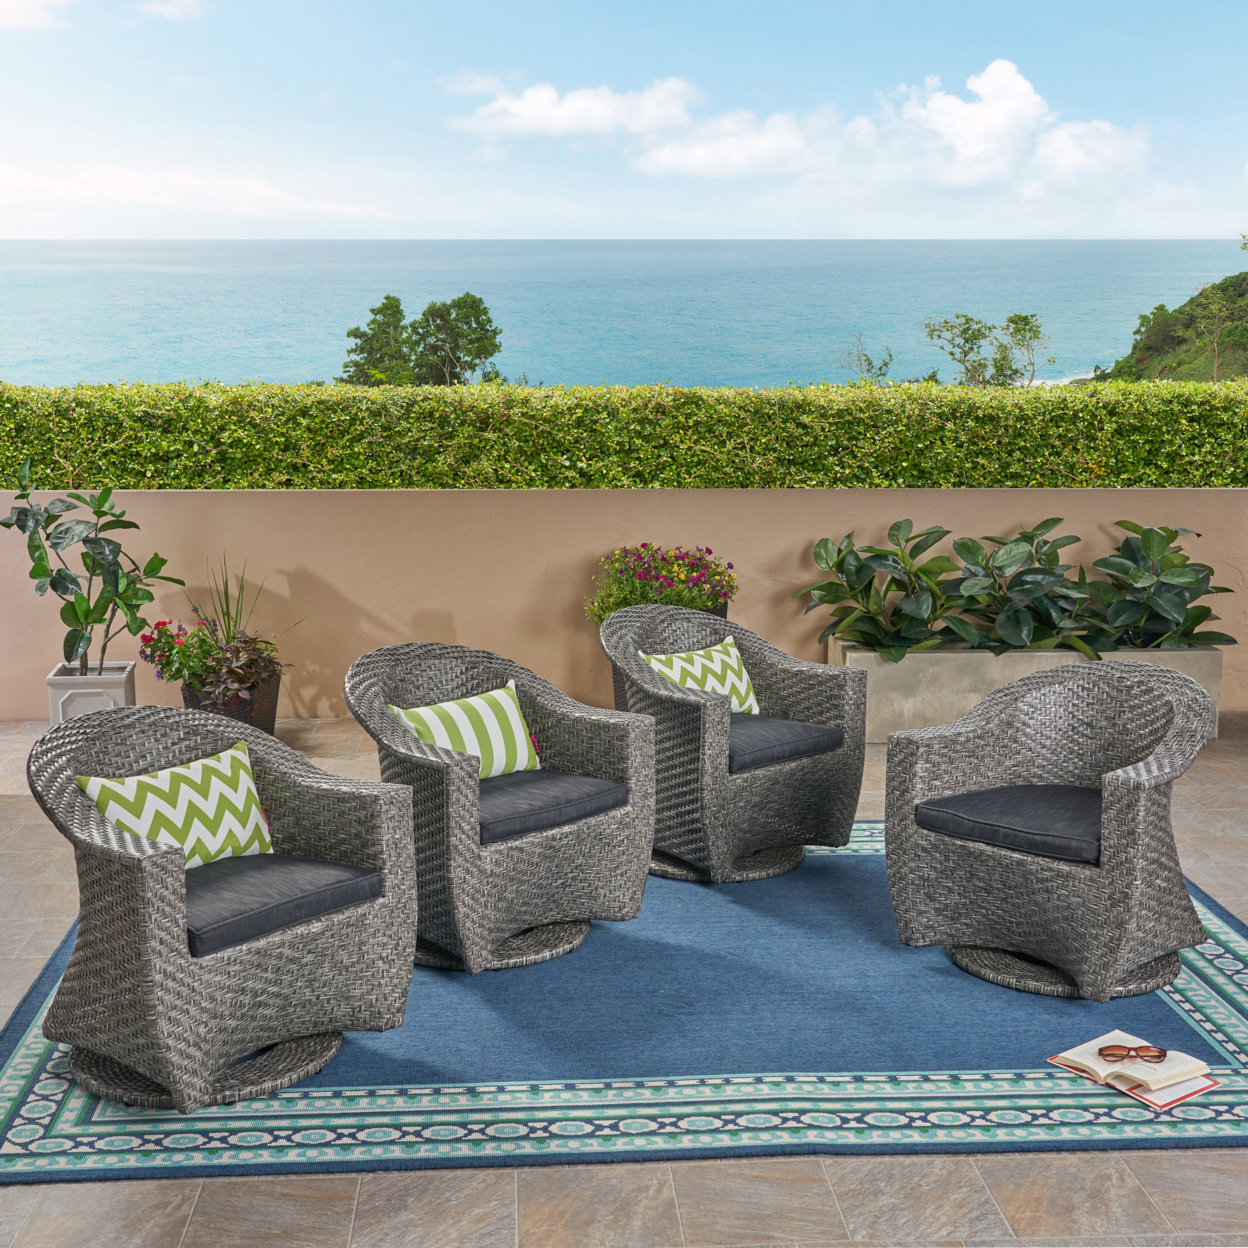 Larchmont Patio Swivel Chairs, Wicker With Outdoor Cushions, Mixed Black And Dark Gray - Default, Set Of 2